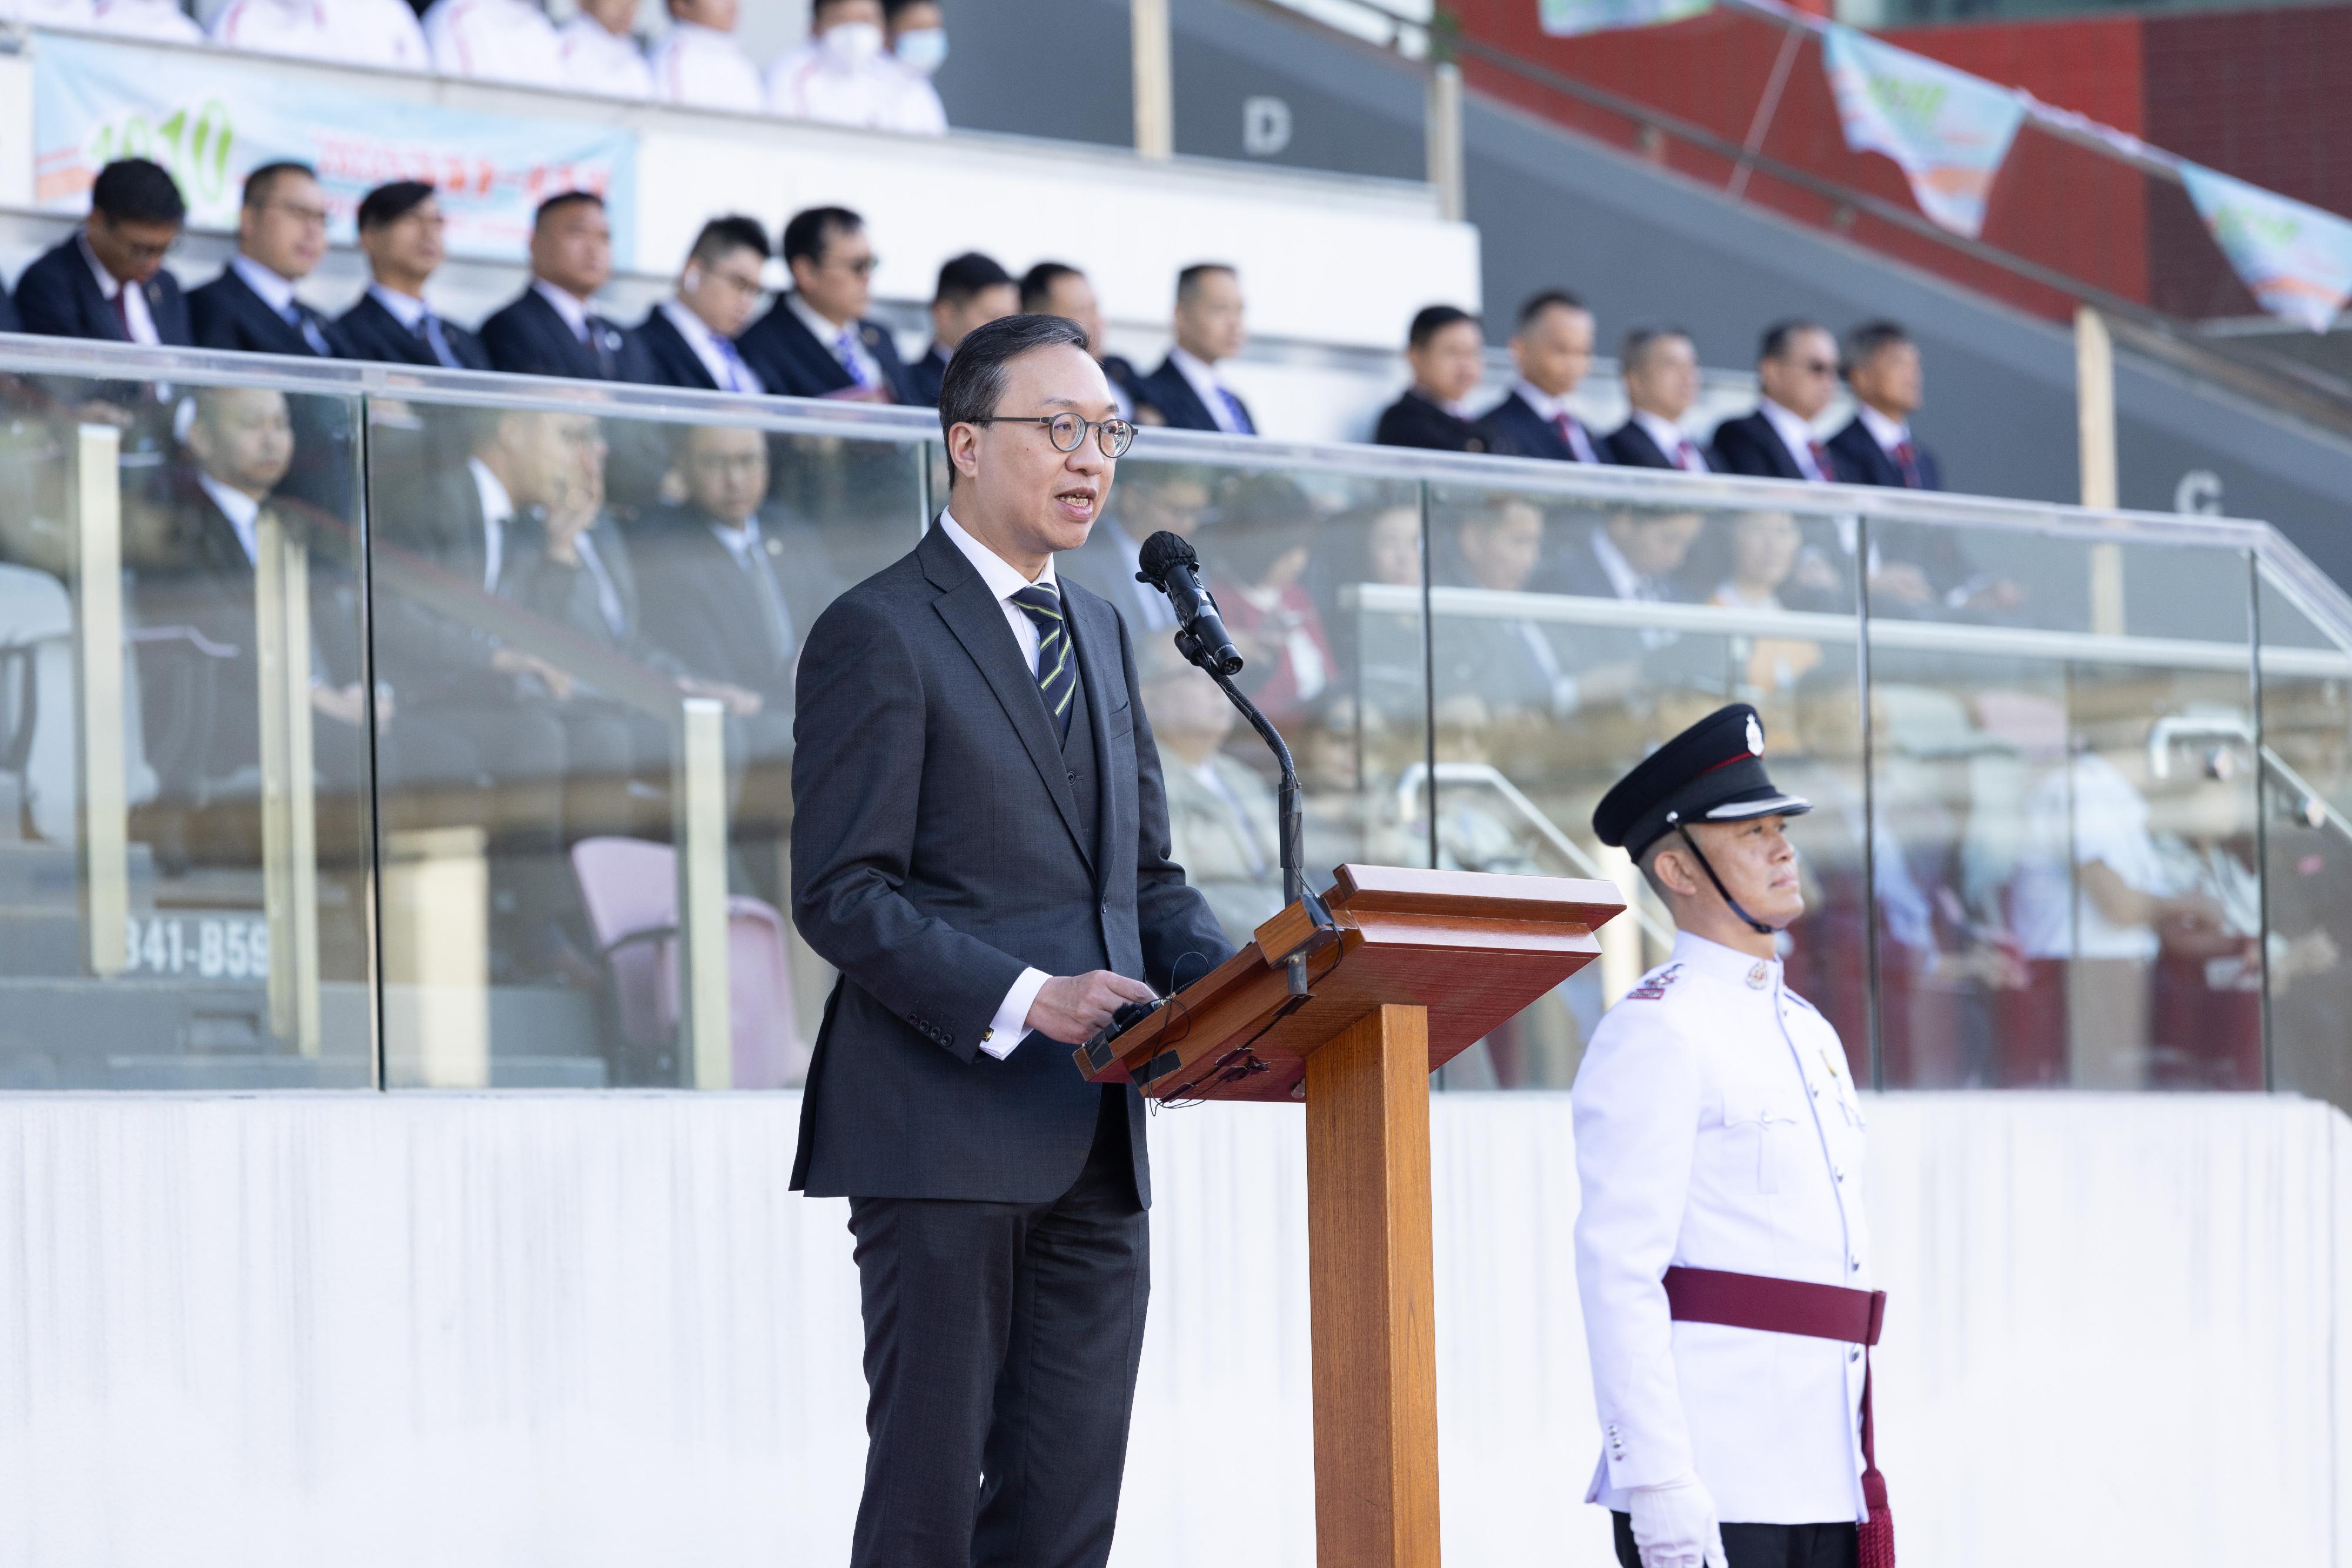 The Secretary for Justice, Mr Paul Lam, SC, reviewed the Fire Services passing-out parade at the Fire and Ambulance Services Academy today (November 17). Photo shows Mr Lam delivering a speech at the ceremony.